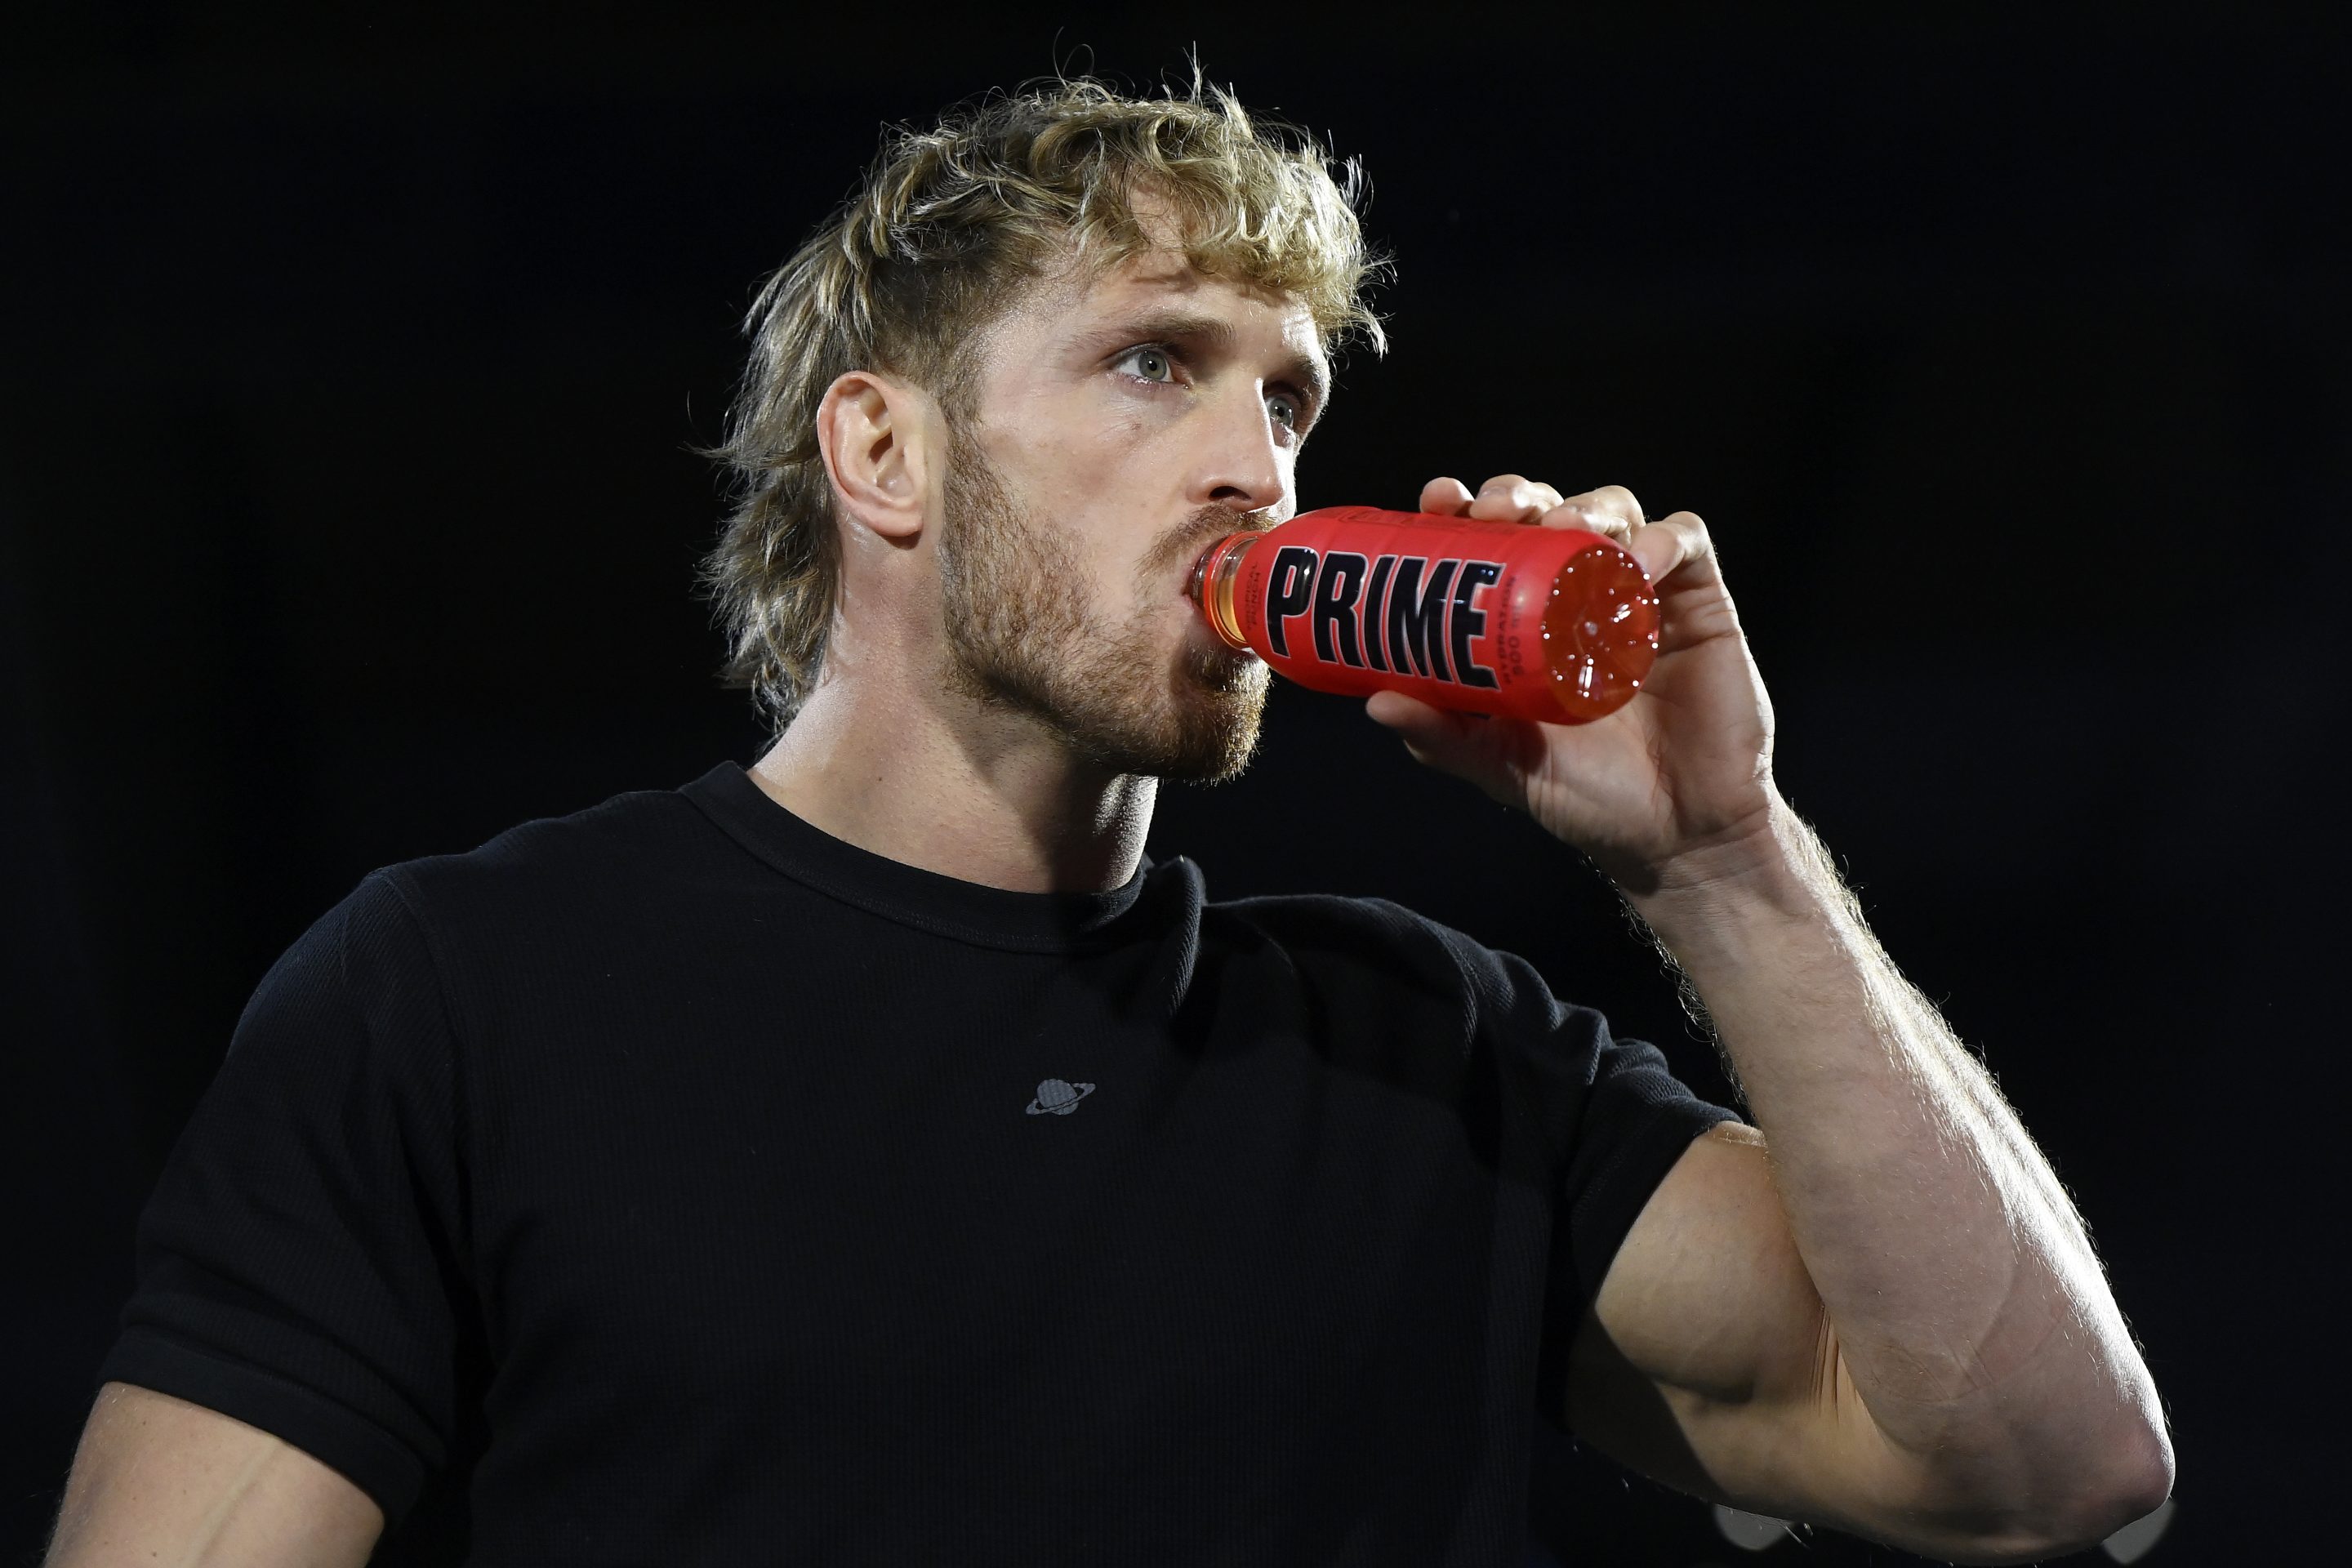 Logan Paul drinks a can of Prime, an energy drink